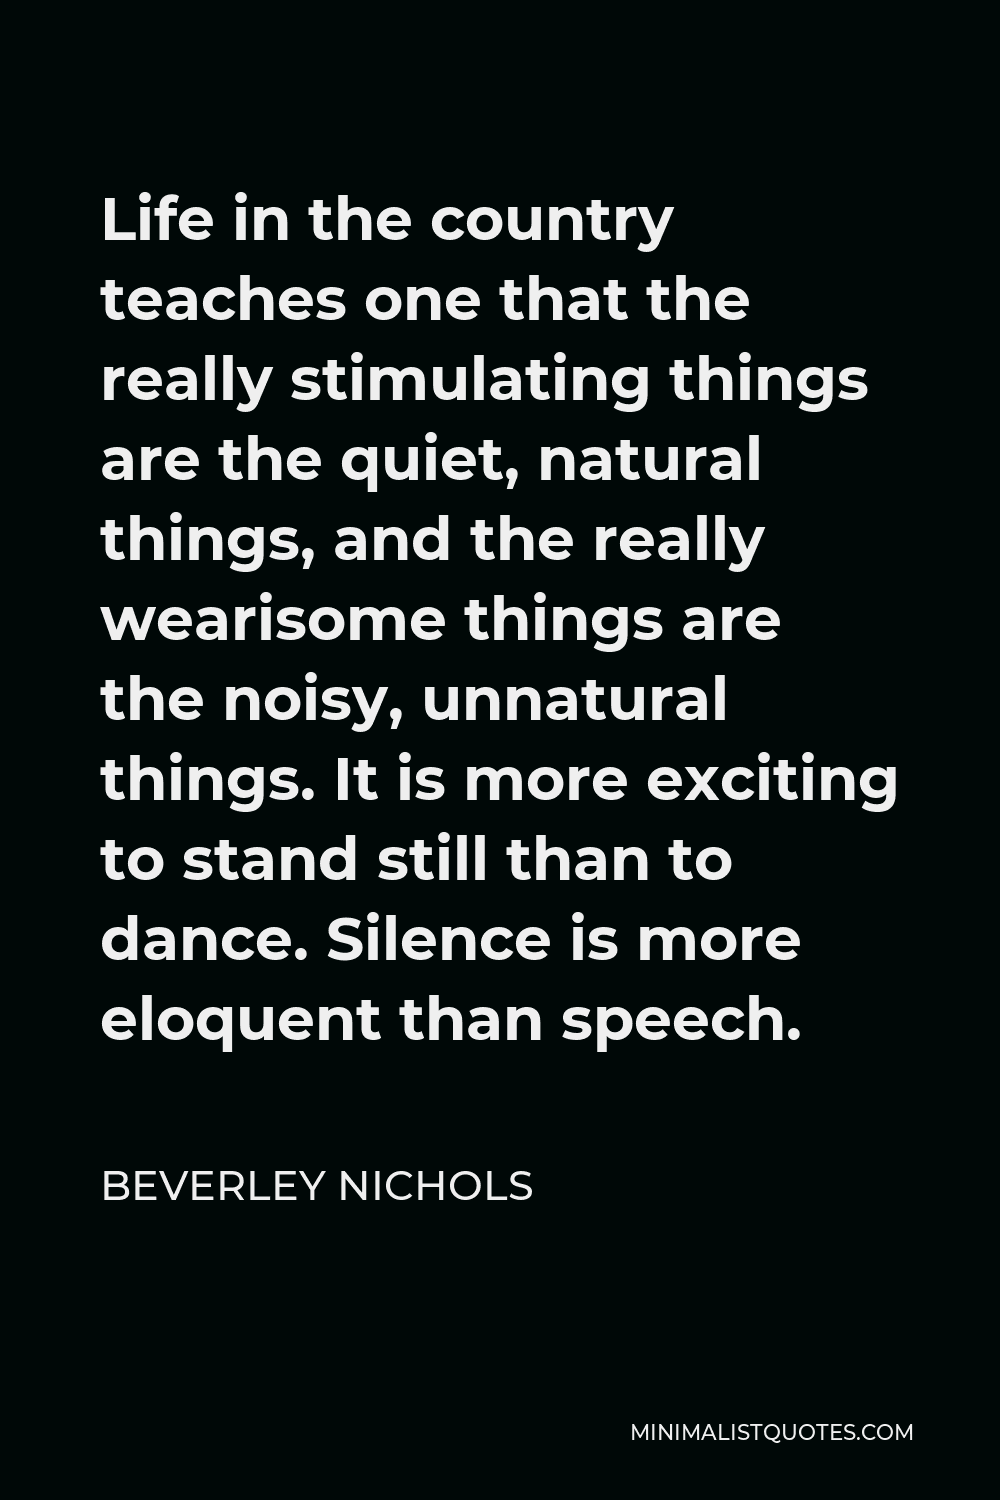 Beverley Nichols Quote - Life in the country teaches one that the really stimulating things are the quiet, natural things, and the really wearisome things are the noisy, unnatural things. It is more exciting to stand still than to dance. Silence is more eloquent than speech.